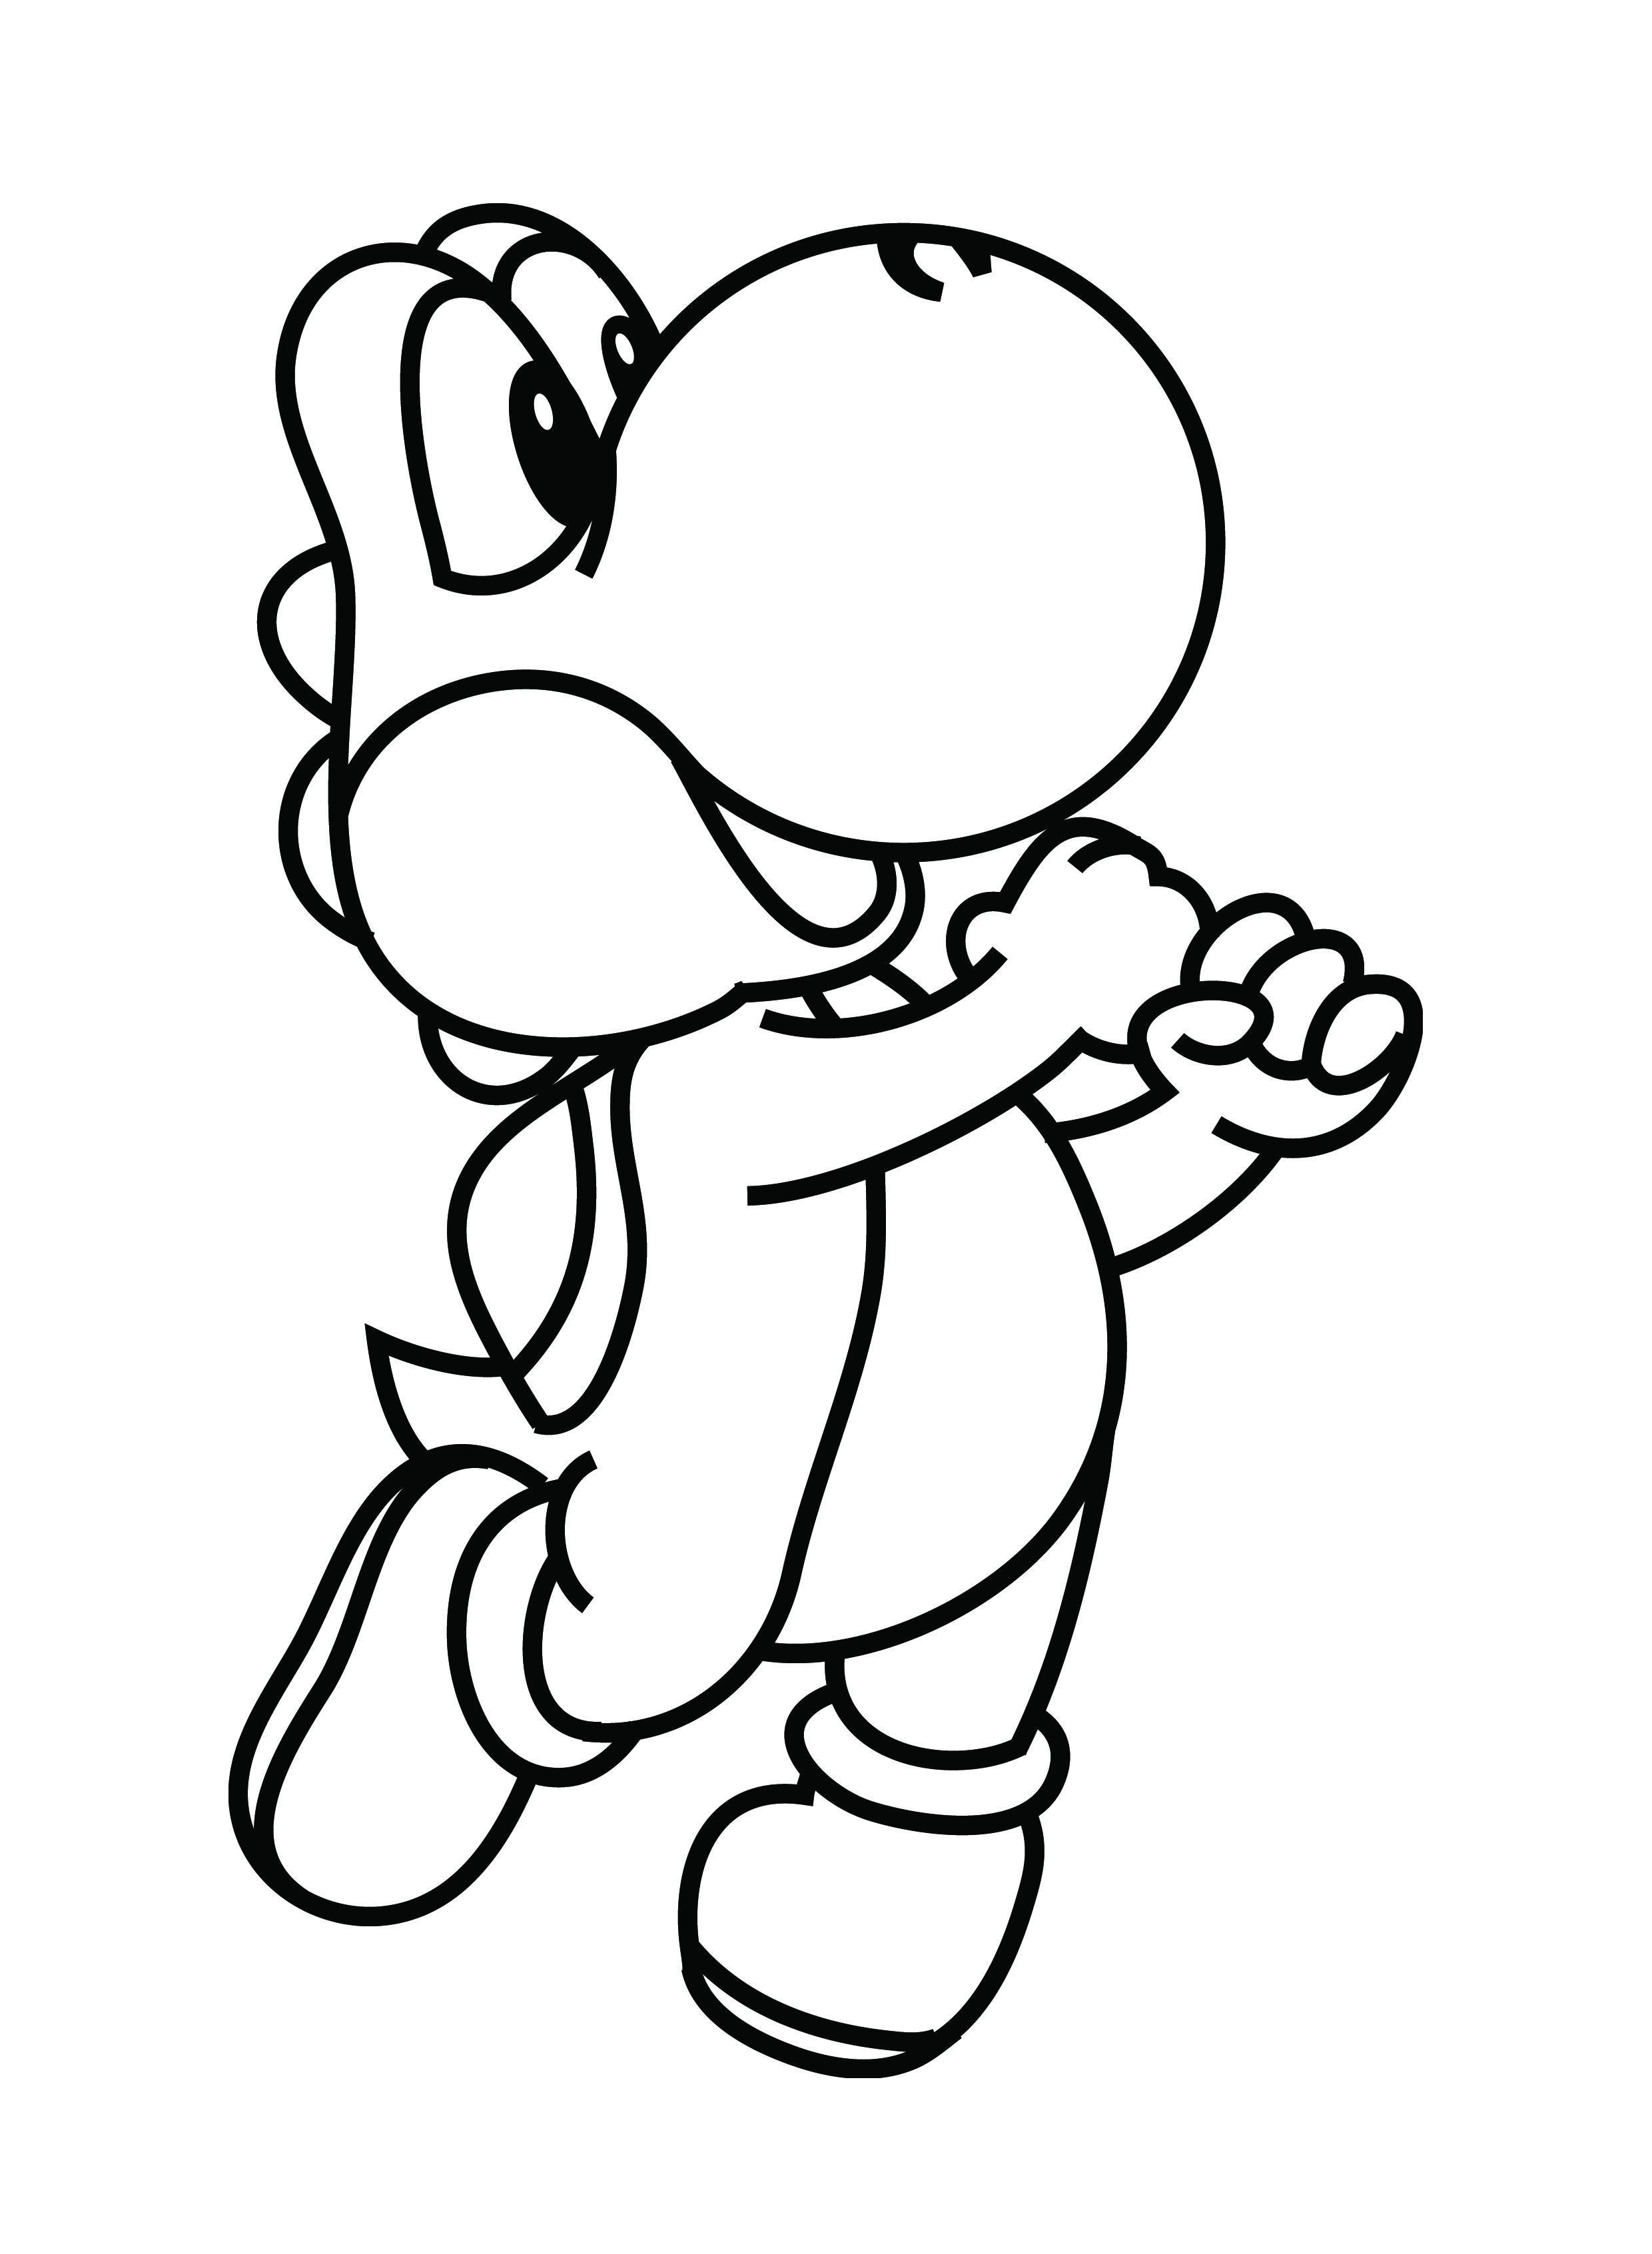 Yoshi Coloring Pages Pdf For Kids - Cute Yoshi Coloring Pages